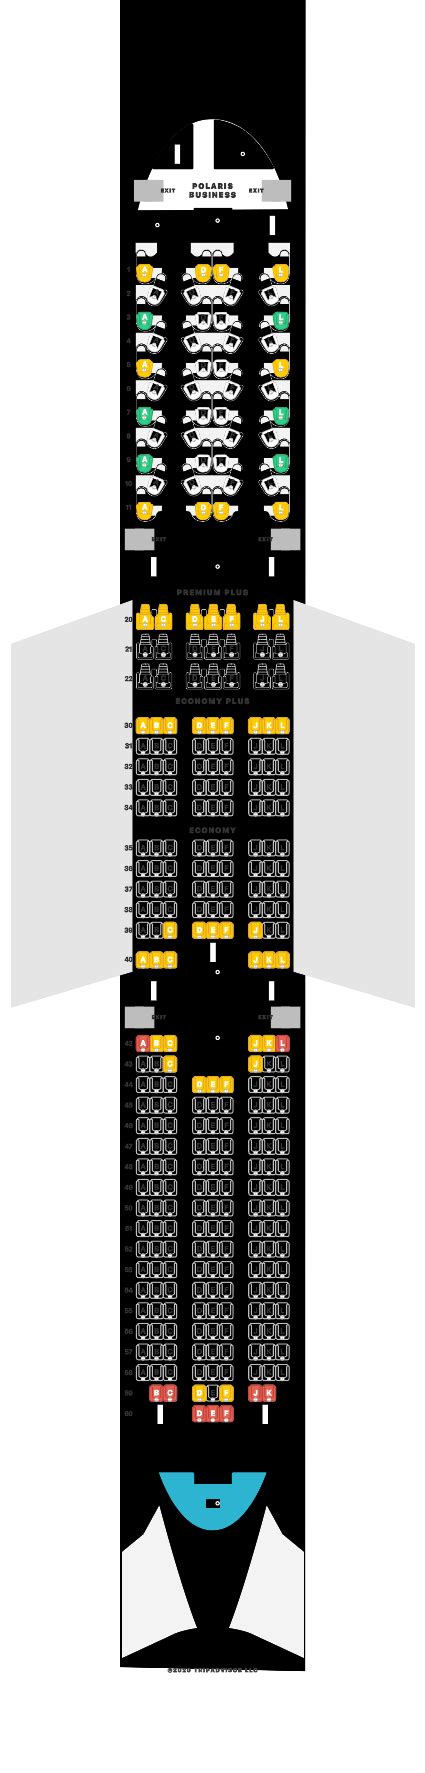 Contact information for renew-deutschland.de - Boeing 787-10 Dreamliner Seat map (44/21/253) Interior specifications 3D view Number of seats Seat numbers Exit rows/doors Seat configuration Standard seat pitch Standard seat recline Seat width Movable aisle armrests Entertainment Wi-Fi Power outlets USB ports Fixed bassinets Note: Specifications are listed as standard and may vary slightly. 